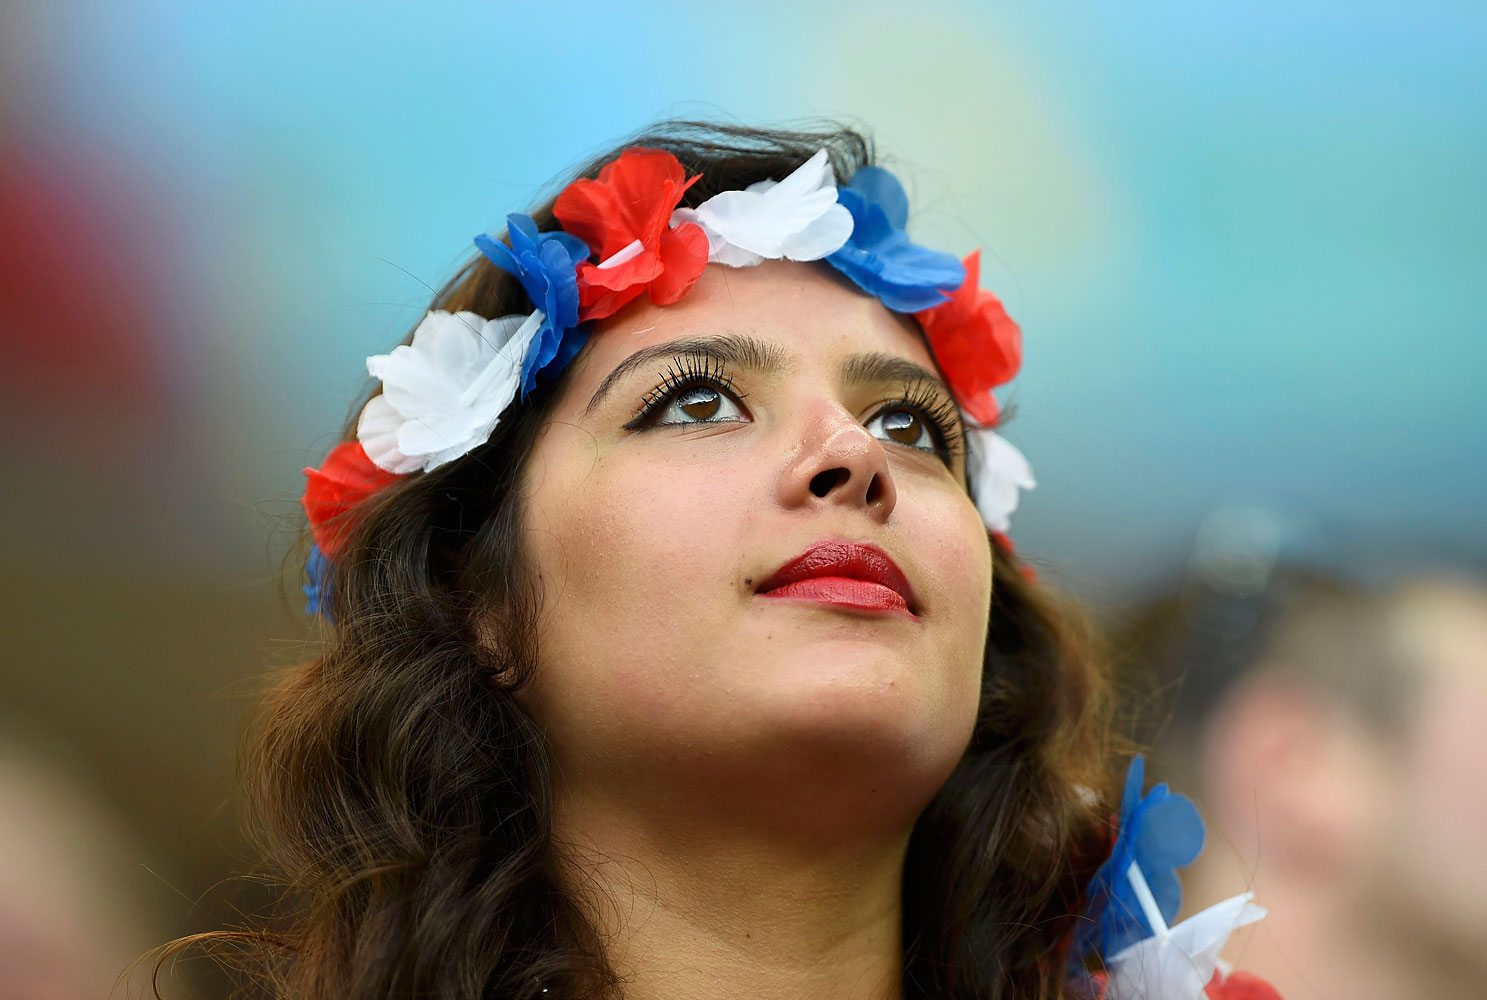 A fan of the U.S. is pictured before the match.